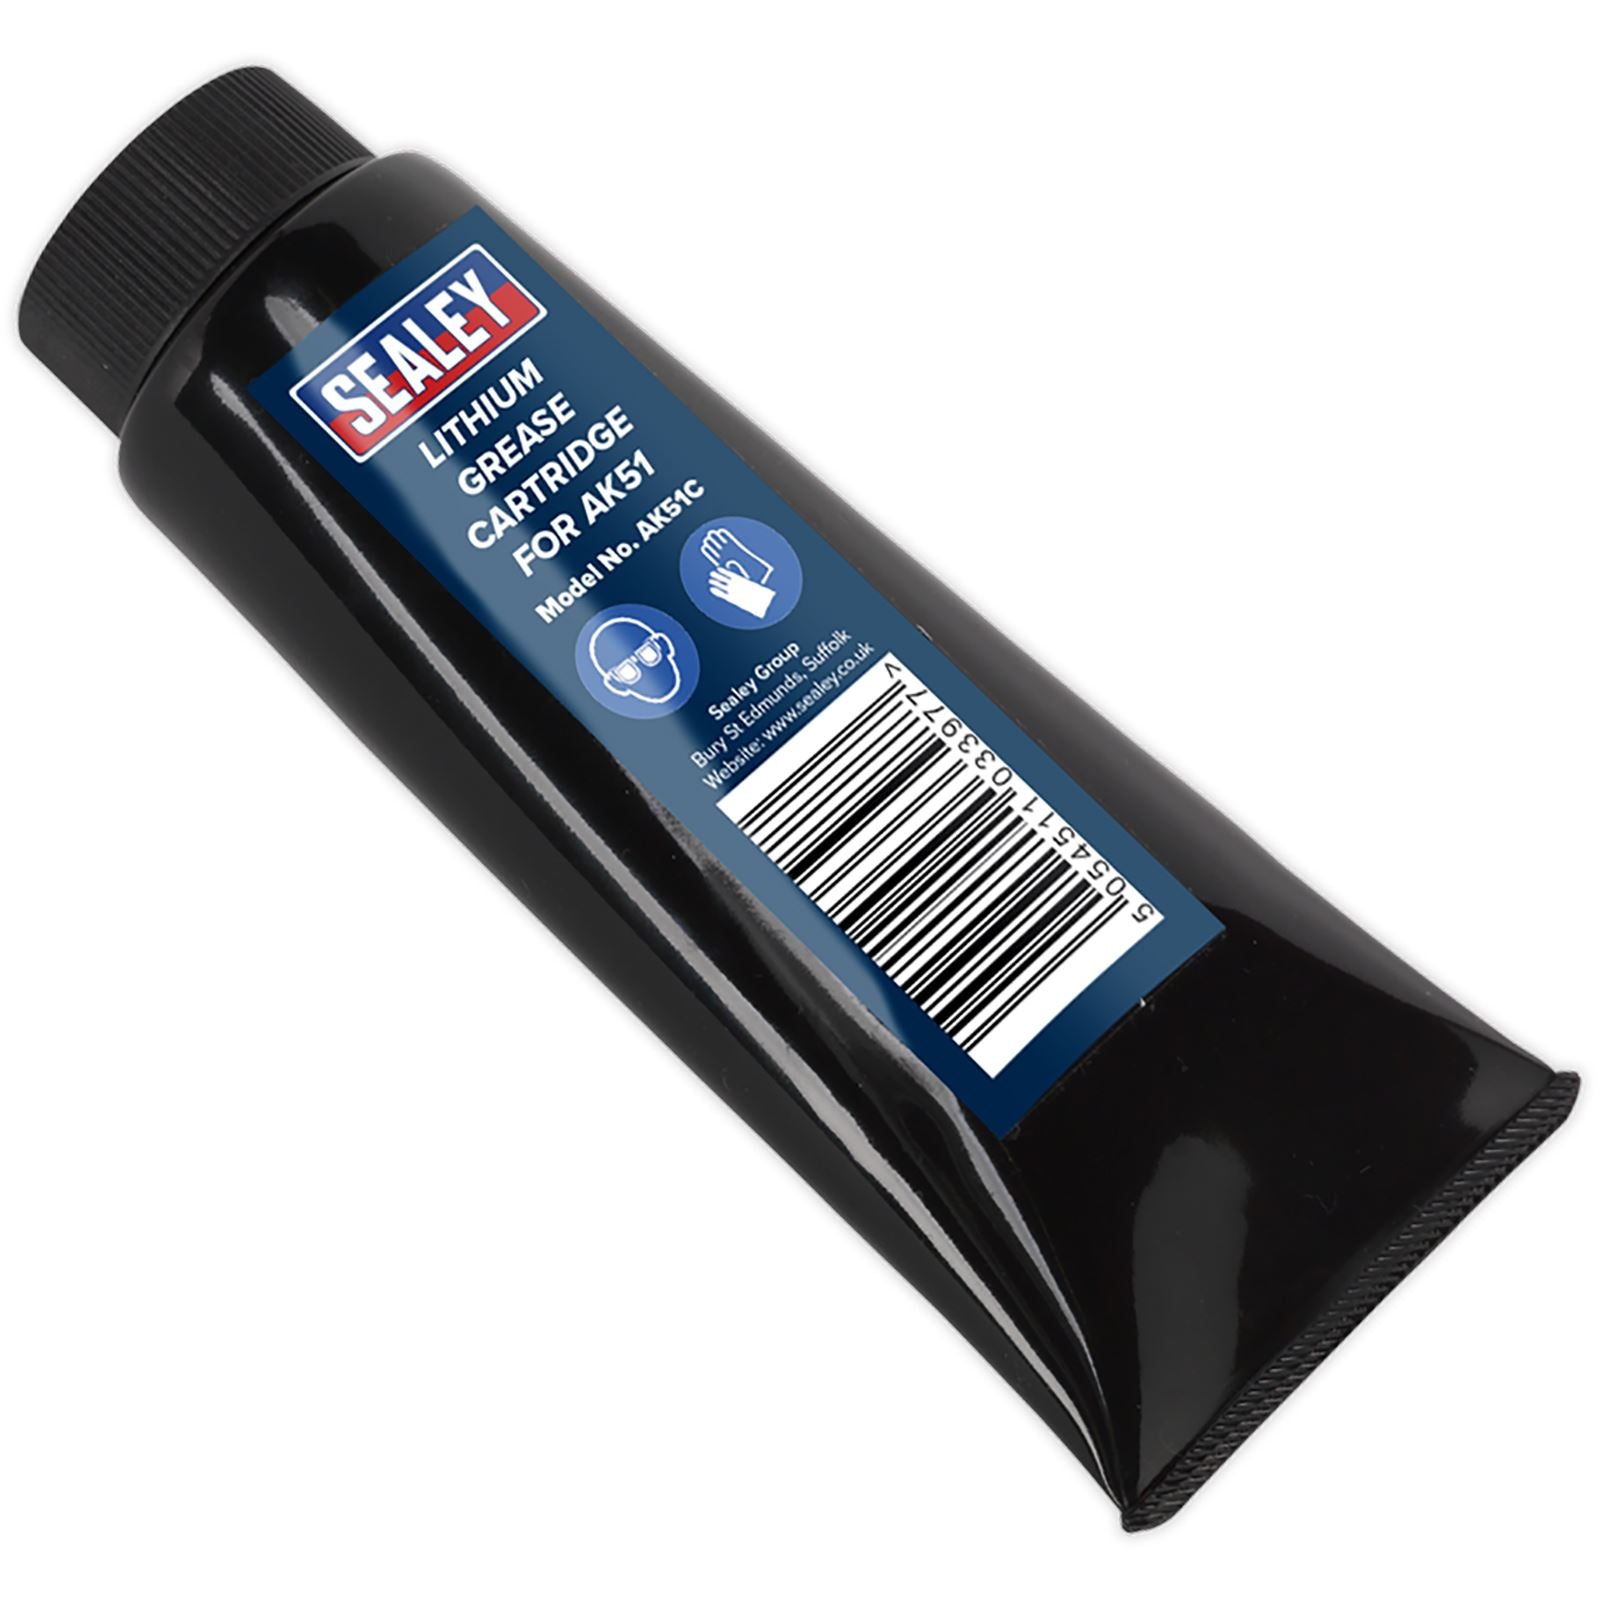 Sealey Lithium Grease Cartridge 100g for AK51